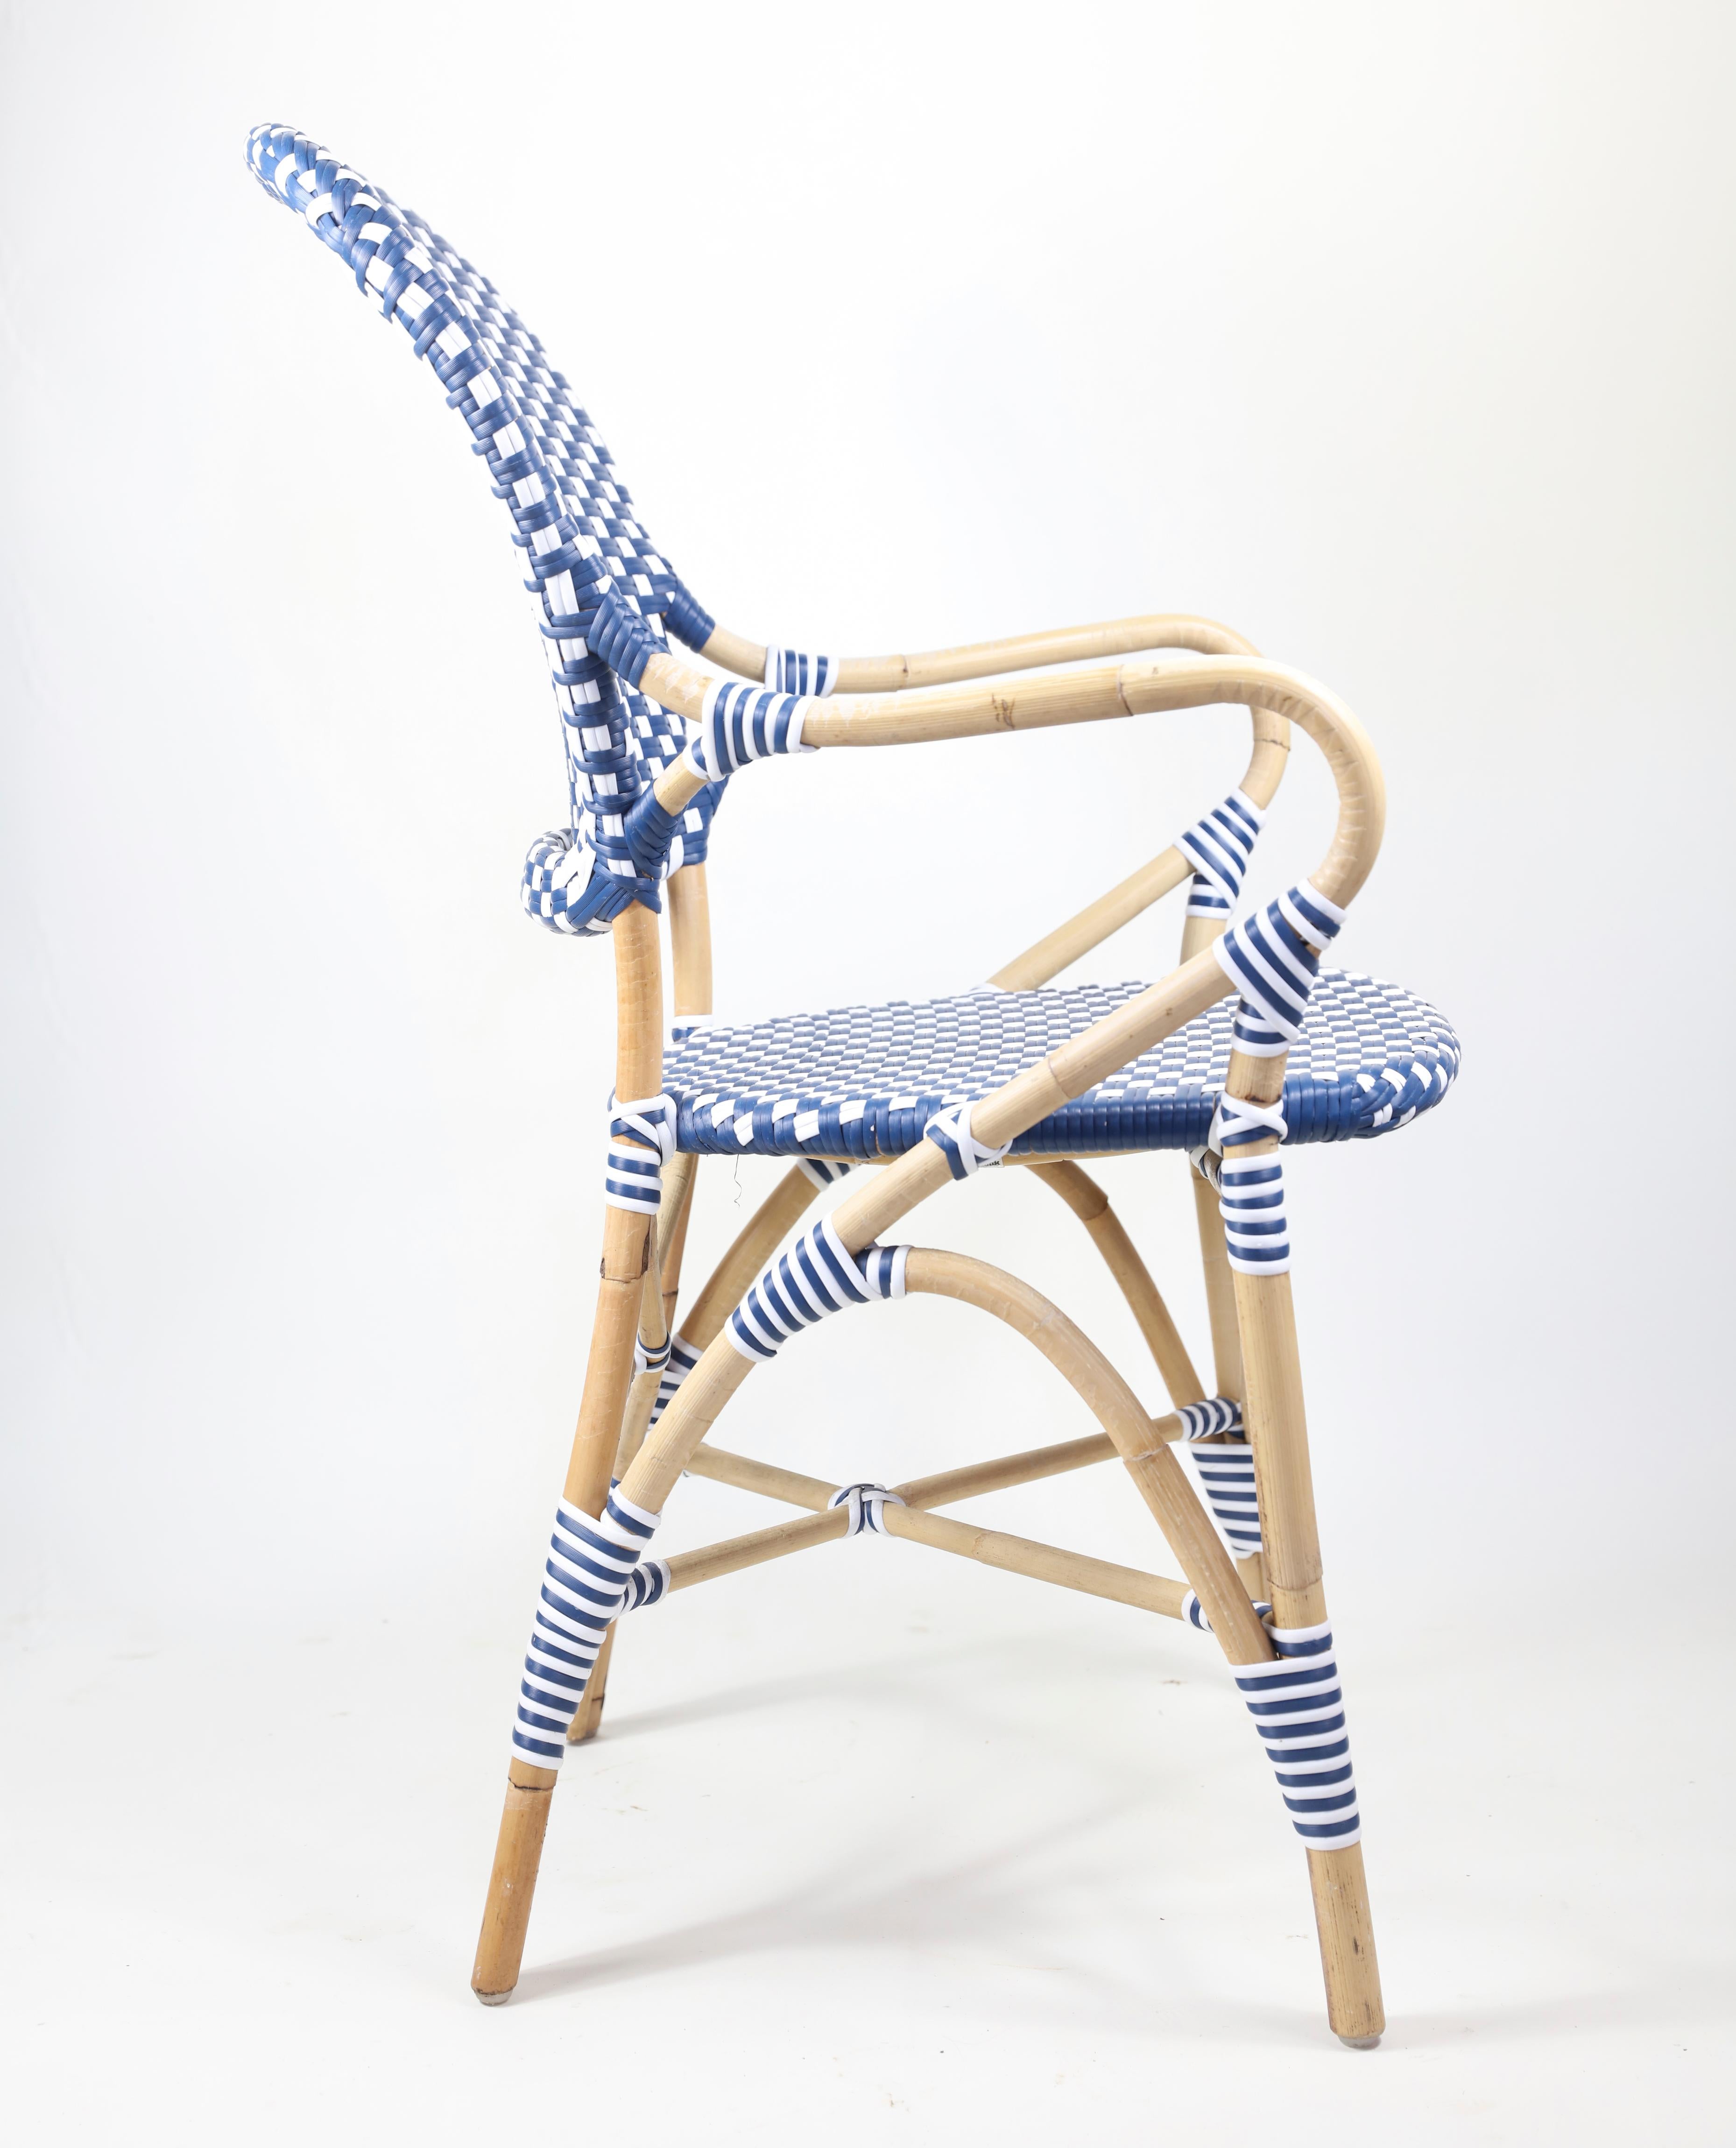 Pair of blue and white Serena and lily woven chairs.

Measures: 35